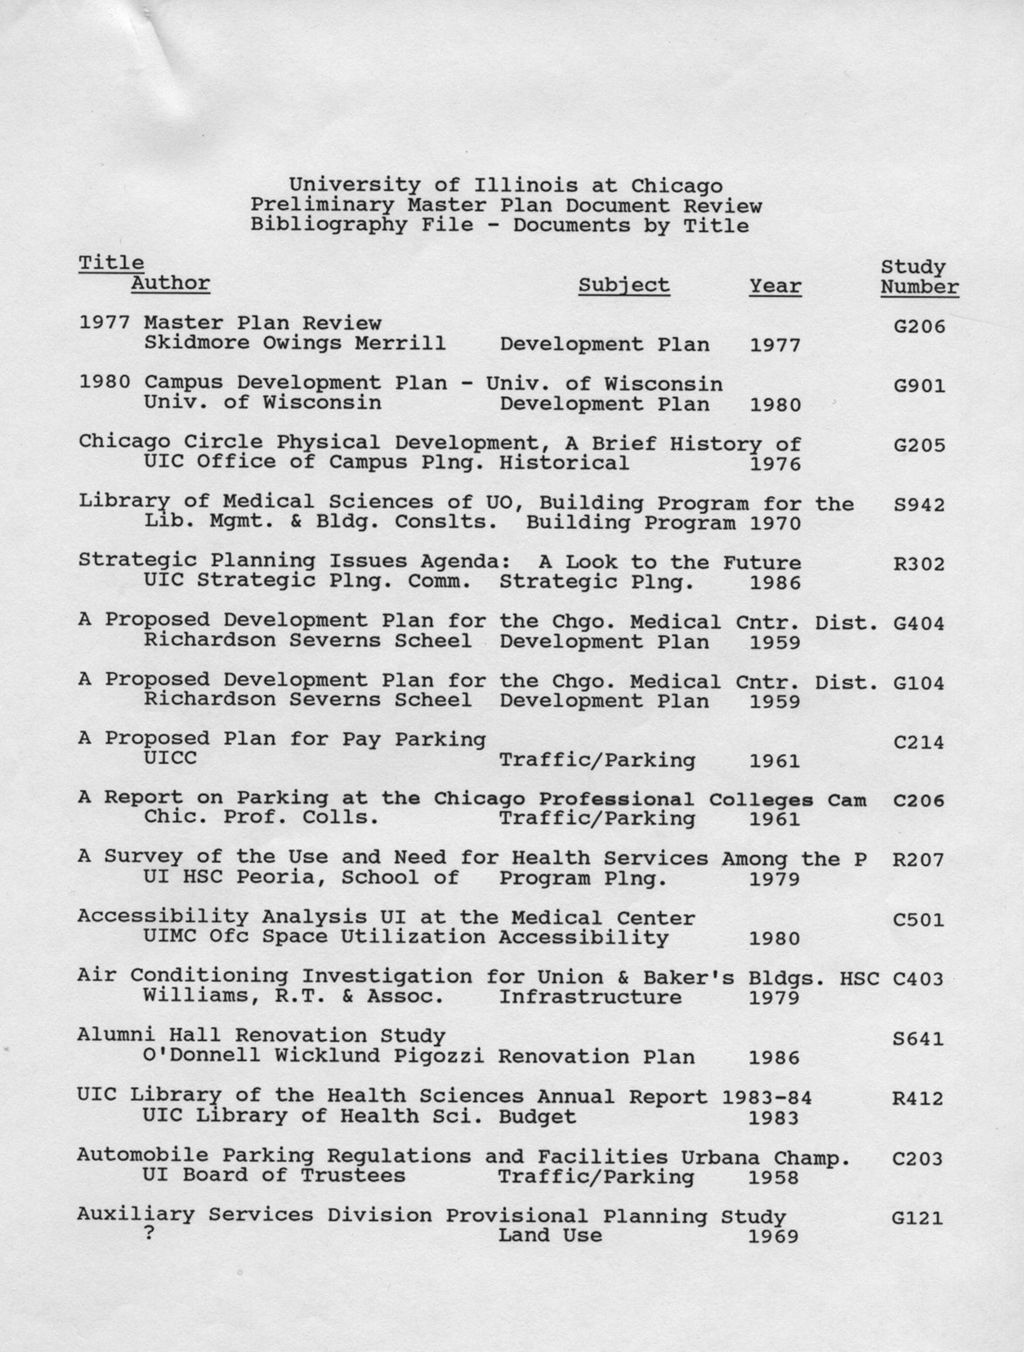 Miniature of Preliminary Master Plan Document Review Bibliography file, University of Illinois at Chicago